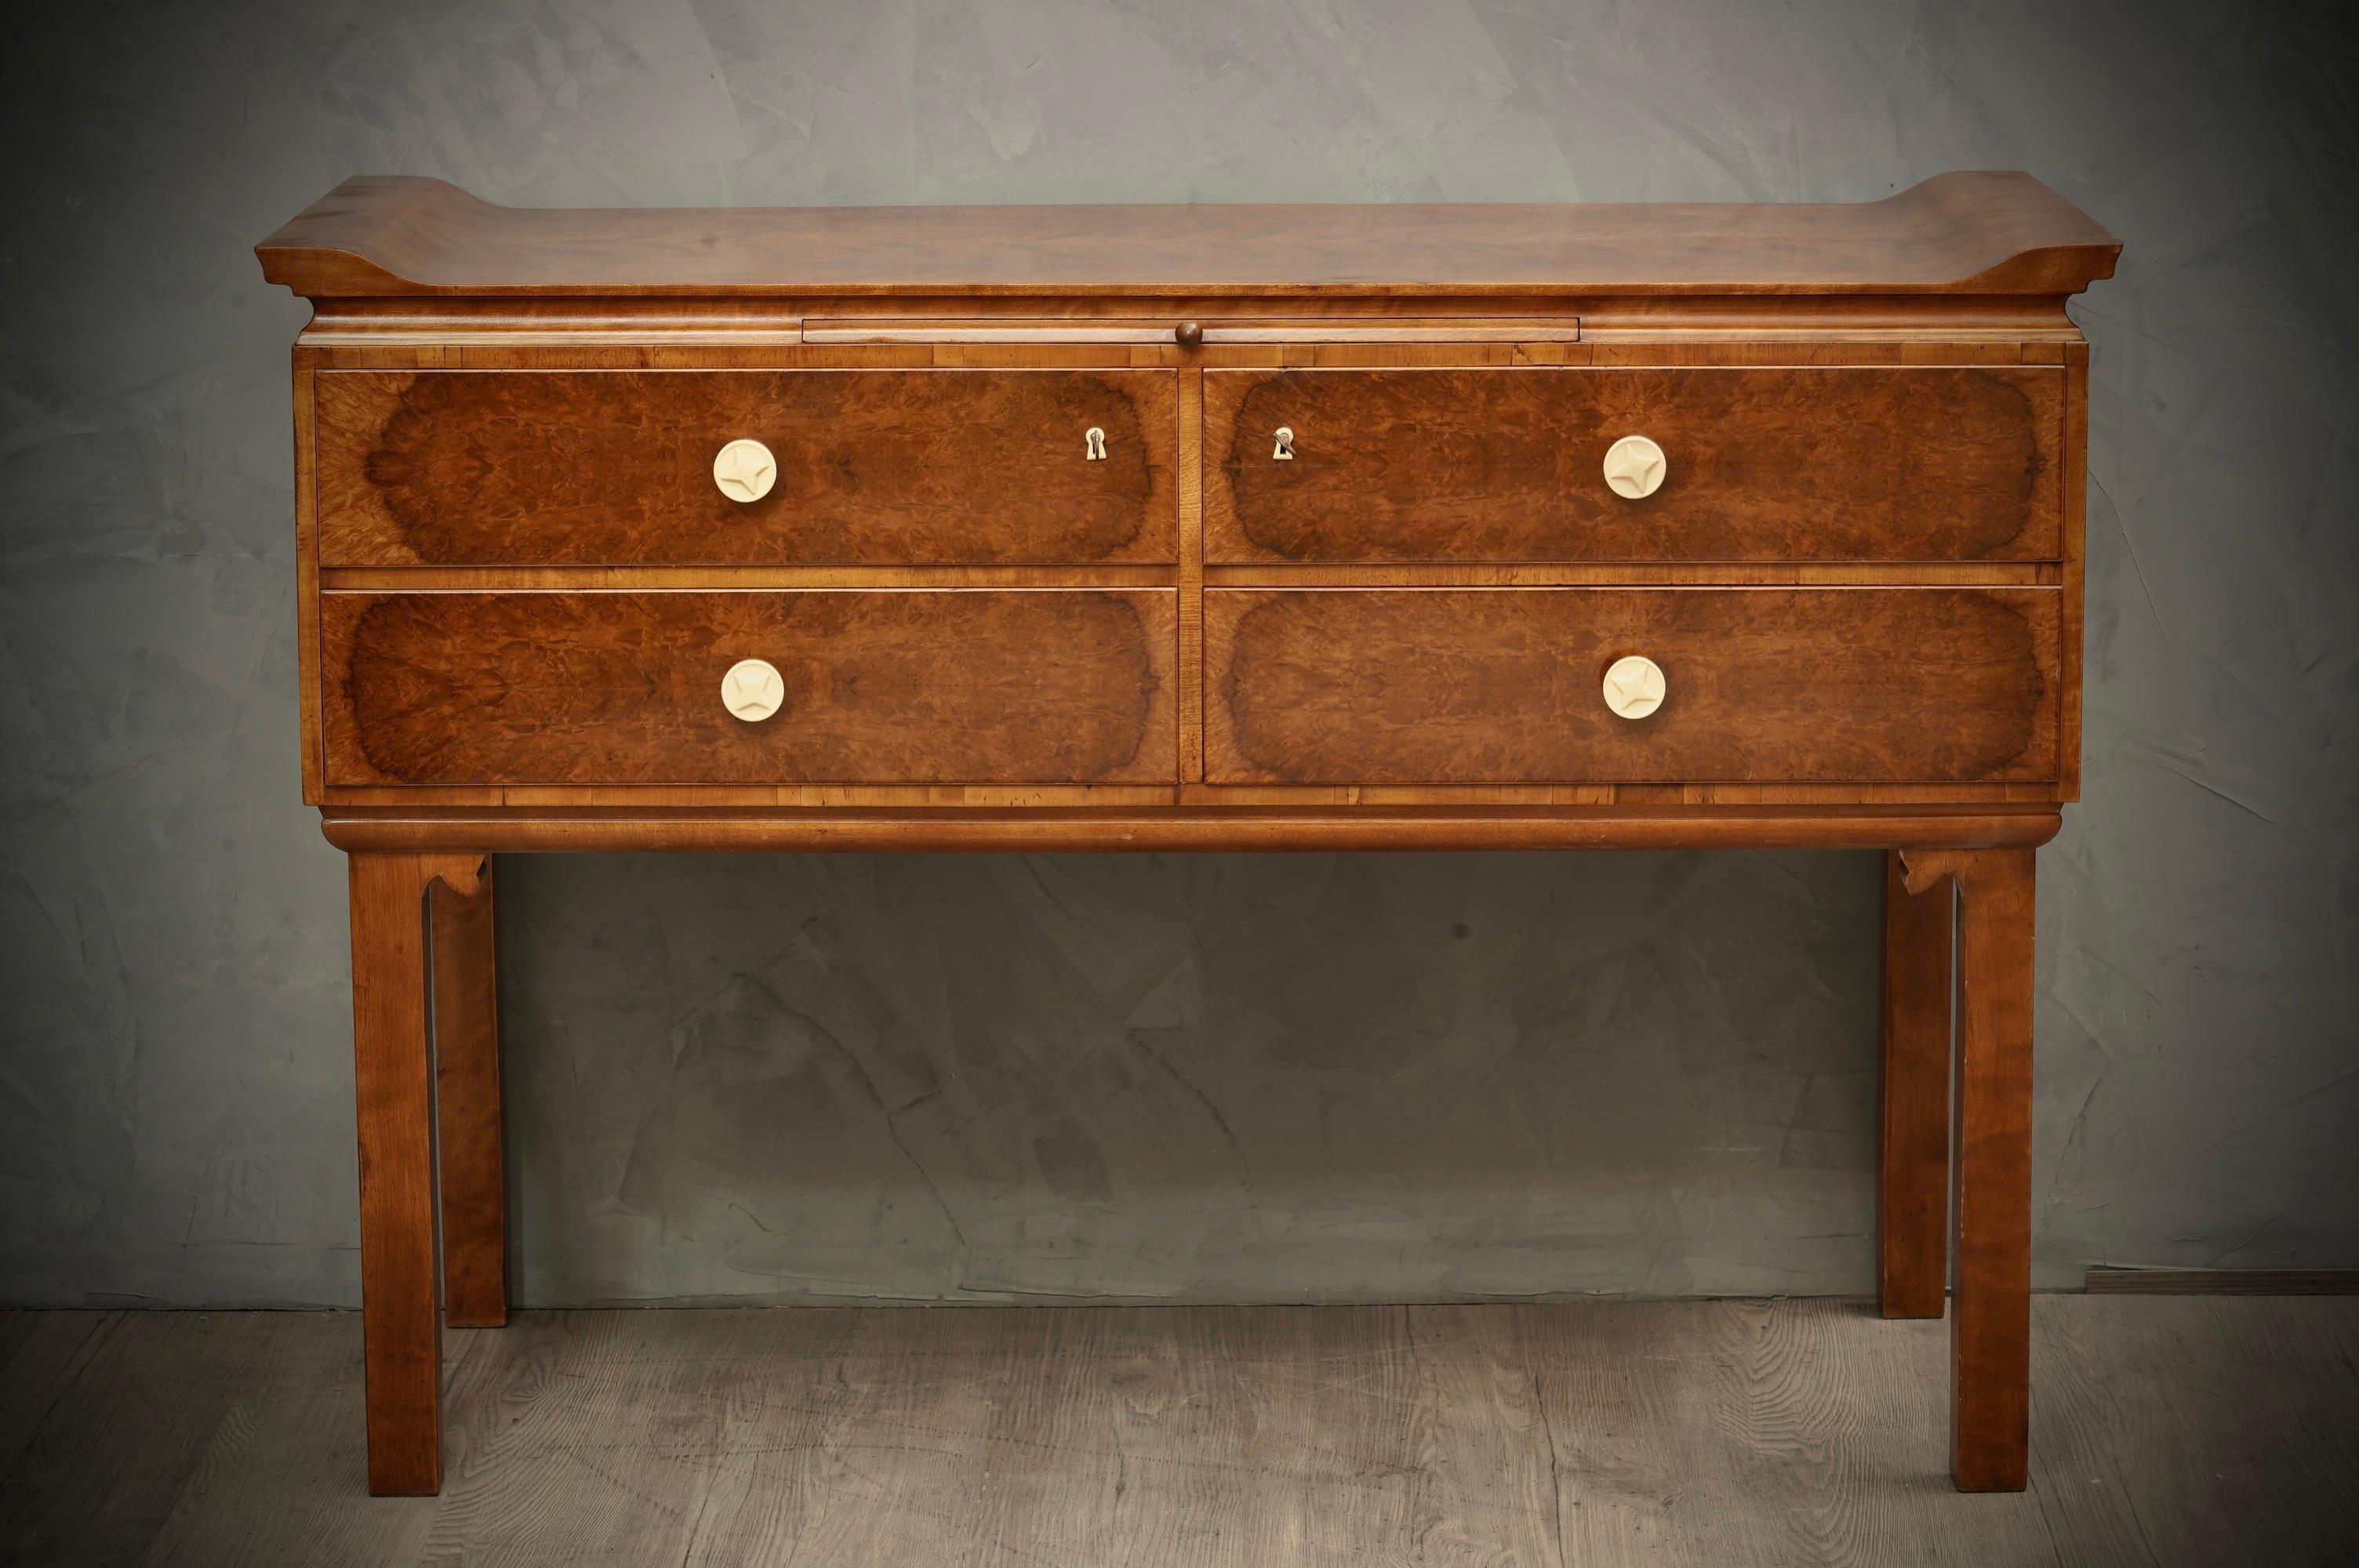 Austrian Art Deco chest of drawers. Chinoiserie by the very particular design.

All veneered in walnut wood, with four drawers. The top of the dresser is flat but has two movements on the sides of the dresser top. On the front, the four drawers are